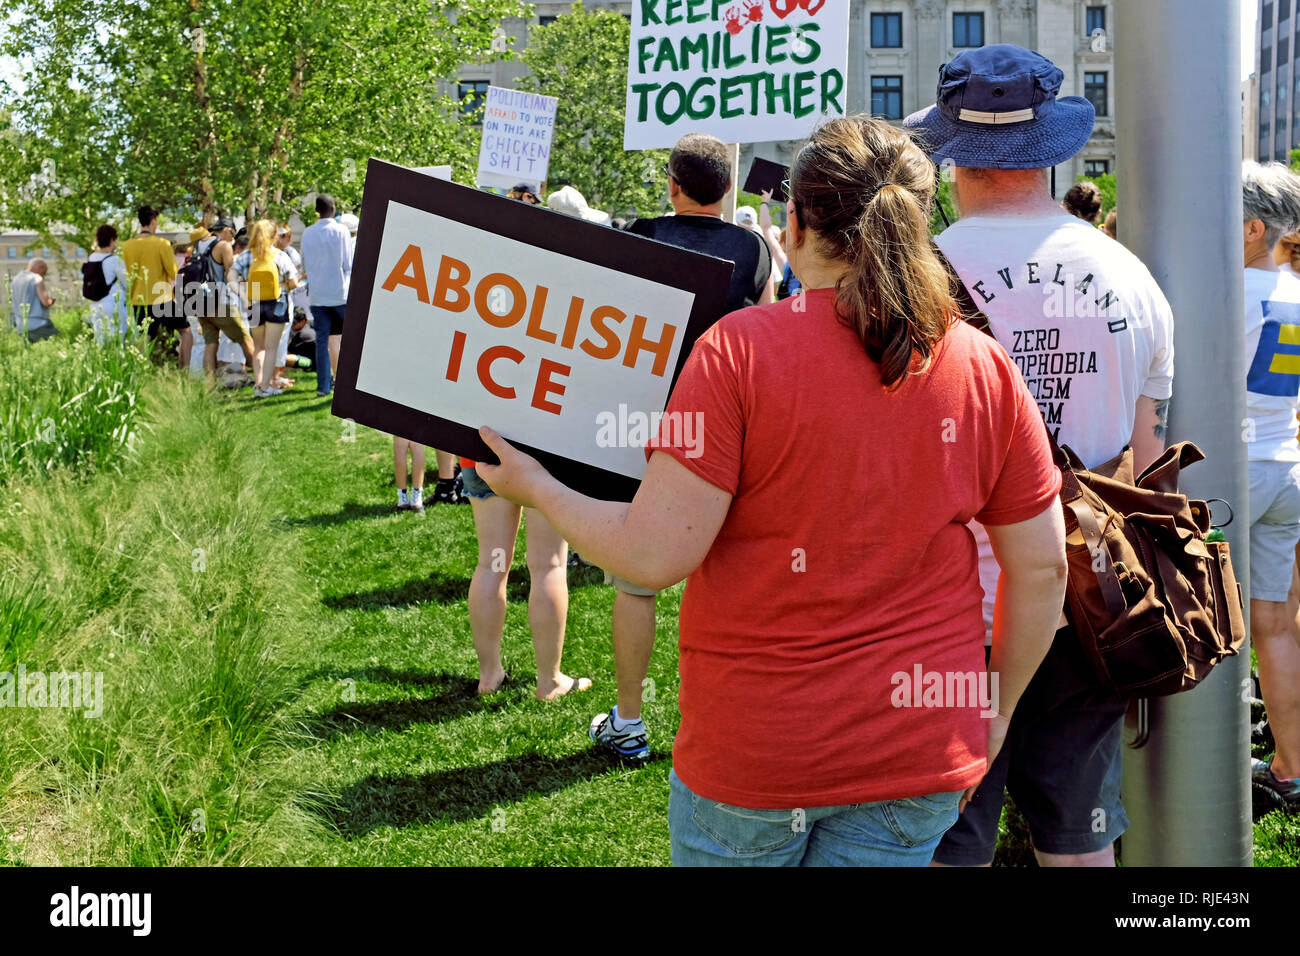 A woman holds an 'Abolish ICE' sign at a June 20, 2018 rally in Cleveland, Ohio, USA demonstrating against Trump immigration policy changes. Stock Photo